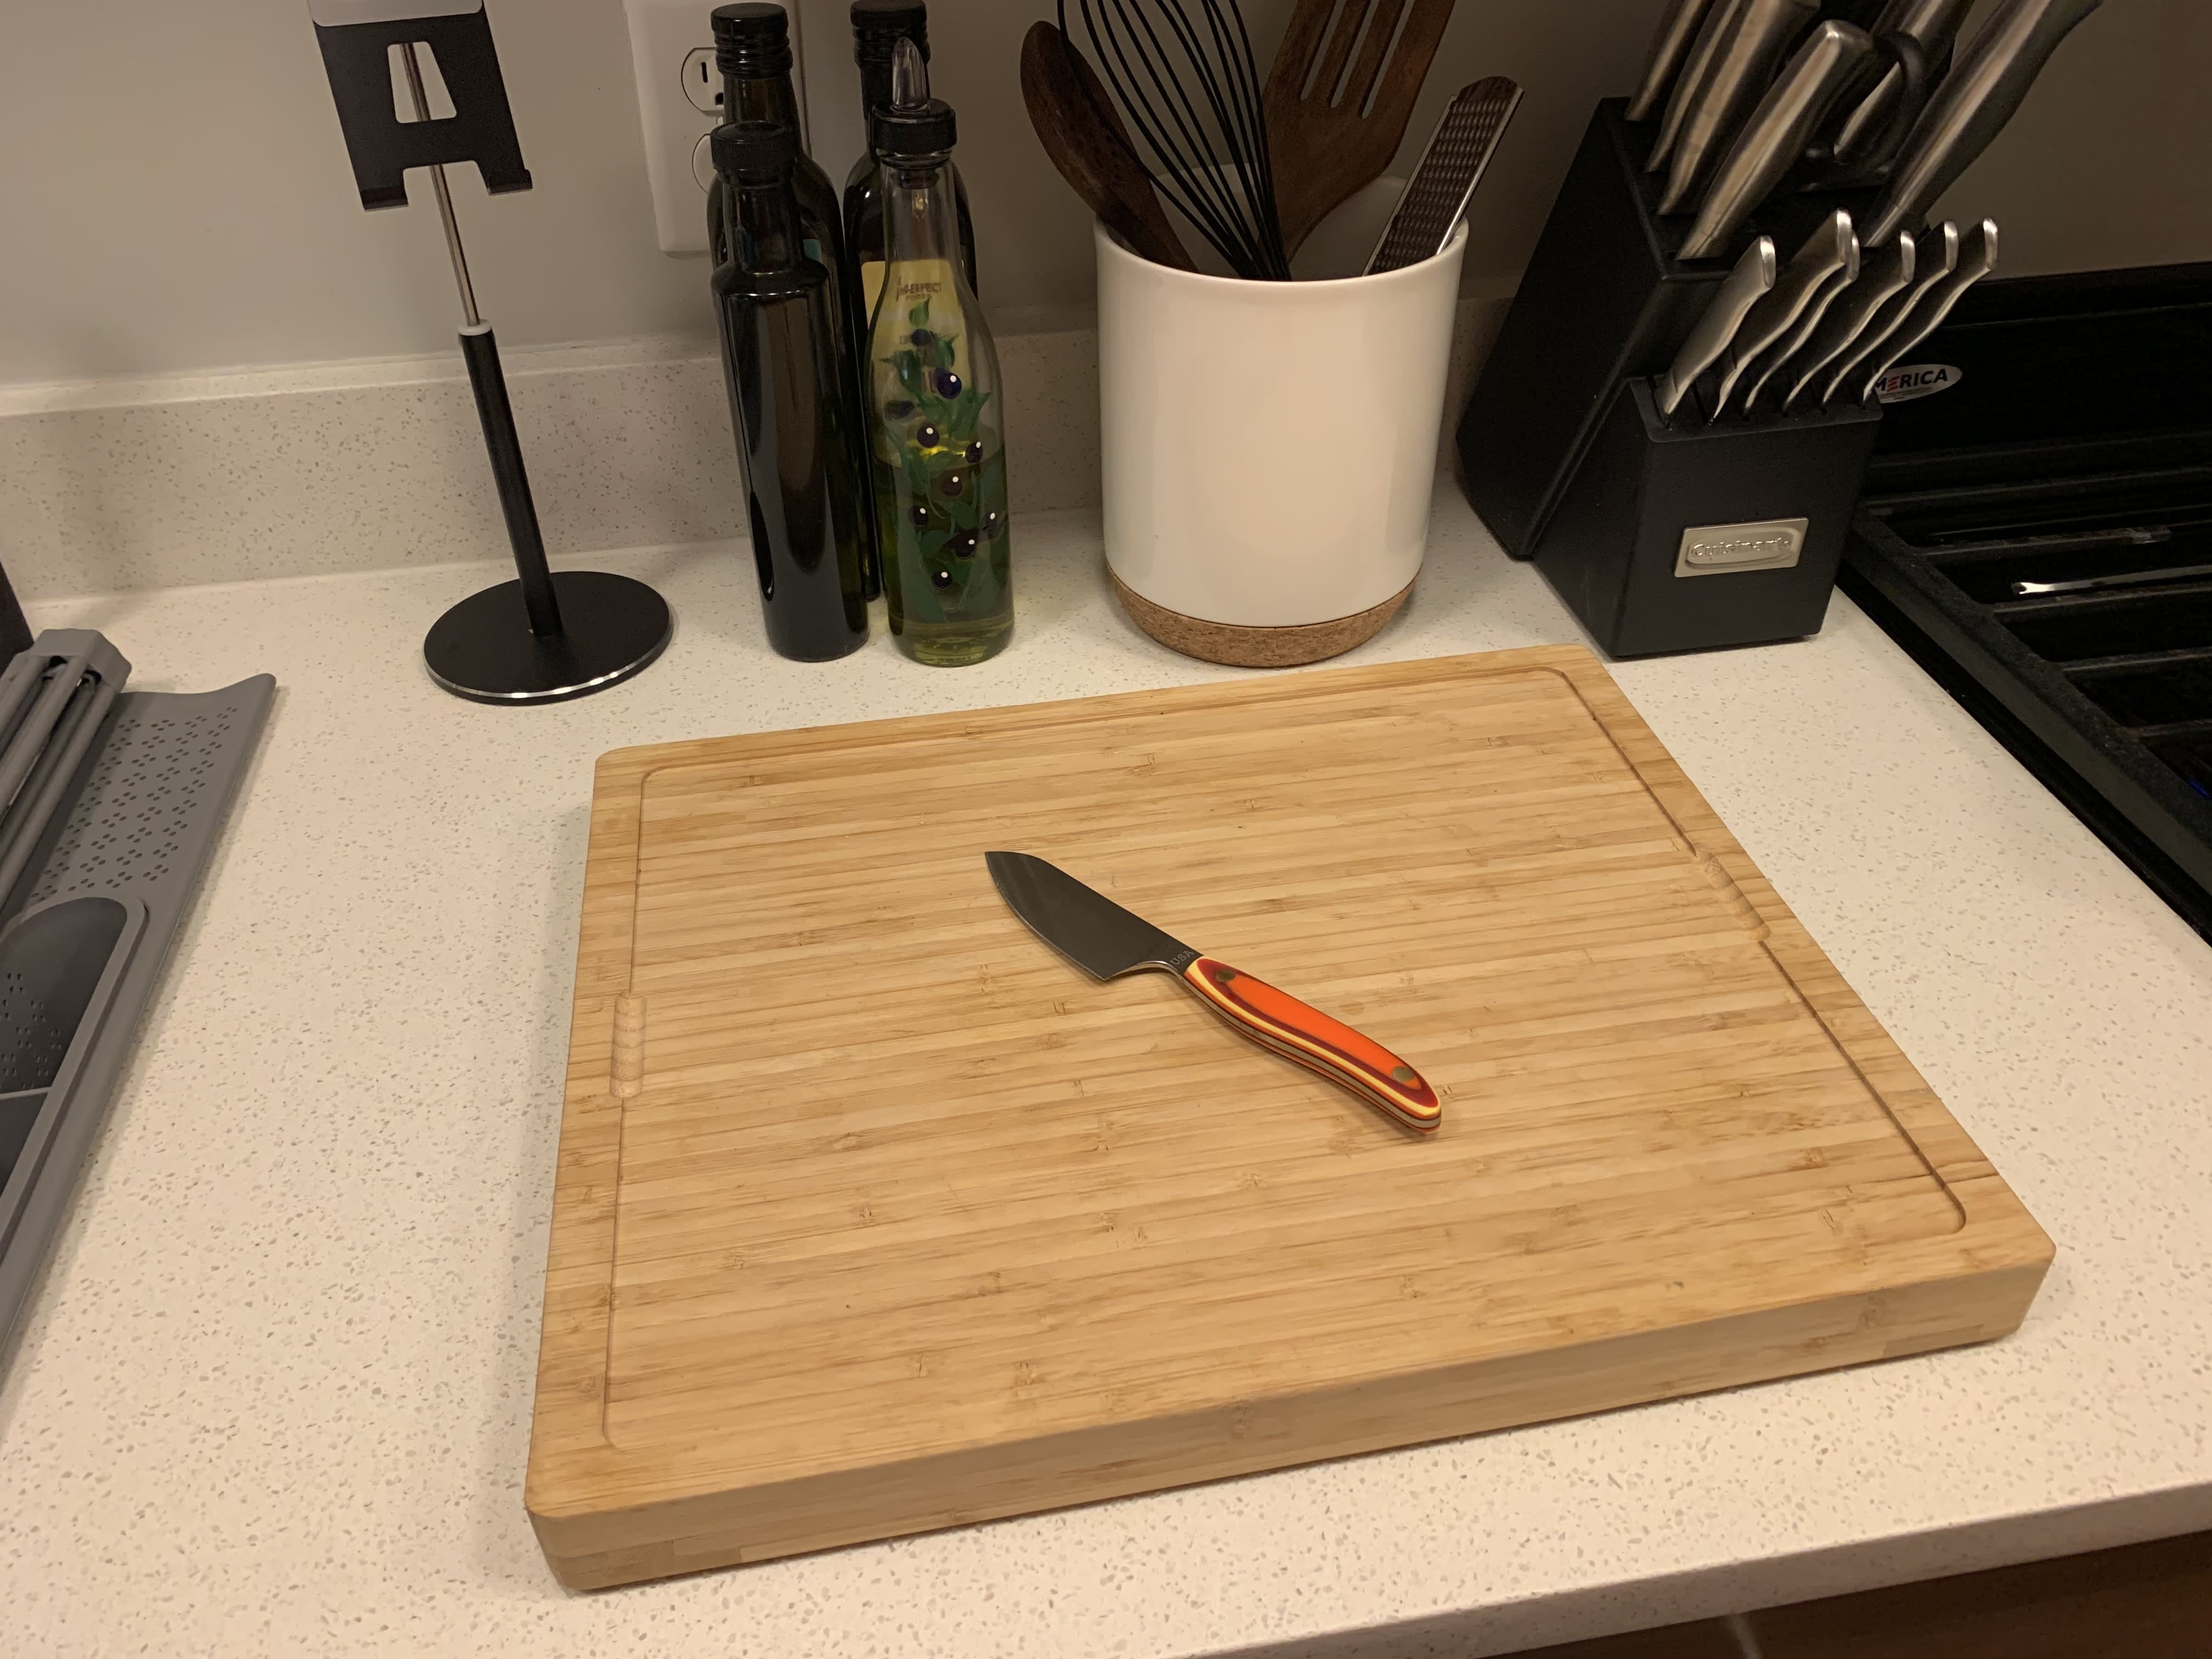 Cooler Kitchen Bamboo Cutting Board Review 2022